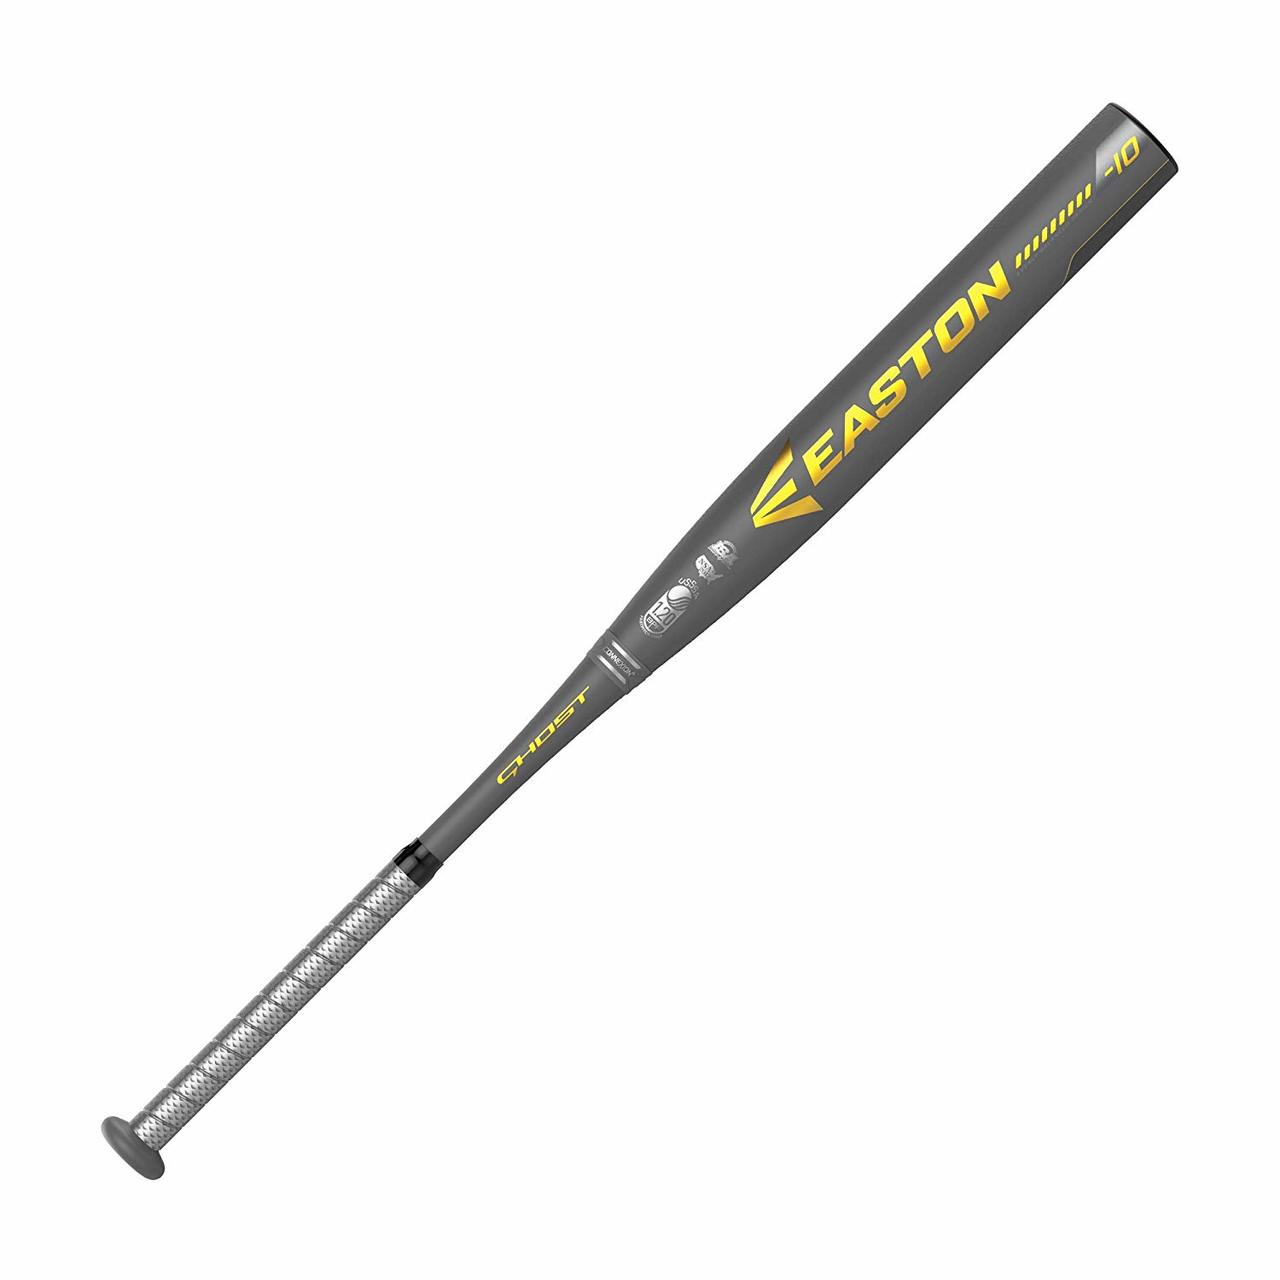 easton-ghost-usssa-fastpitch-softball-bat-33-in-23-oz-fp19ghu10 FP19GHU10-3323 Easton 628412219577 Patent-pending DOUBLE BARREL construction is the ultimate combination of feel pop